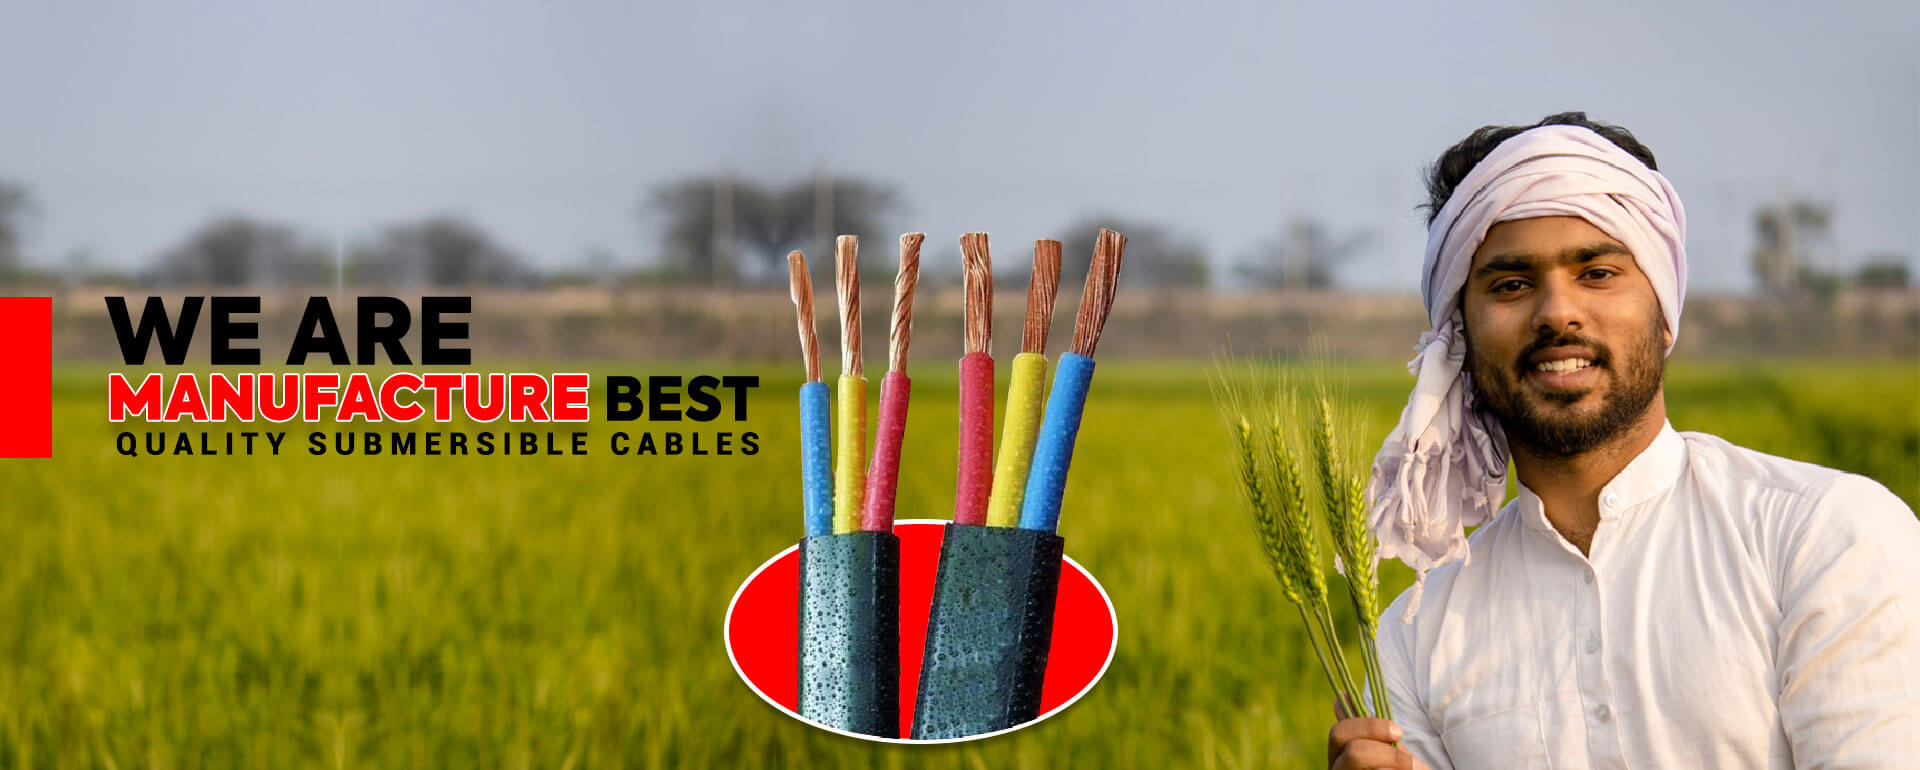 Top Cable Manufacturers in India